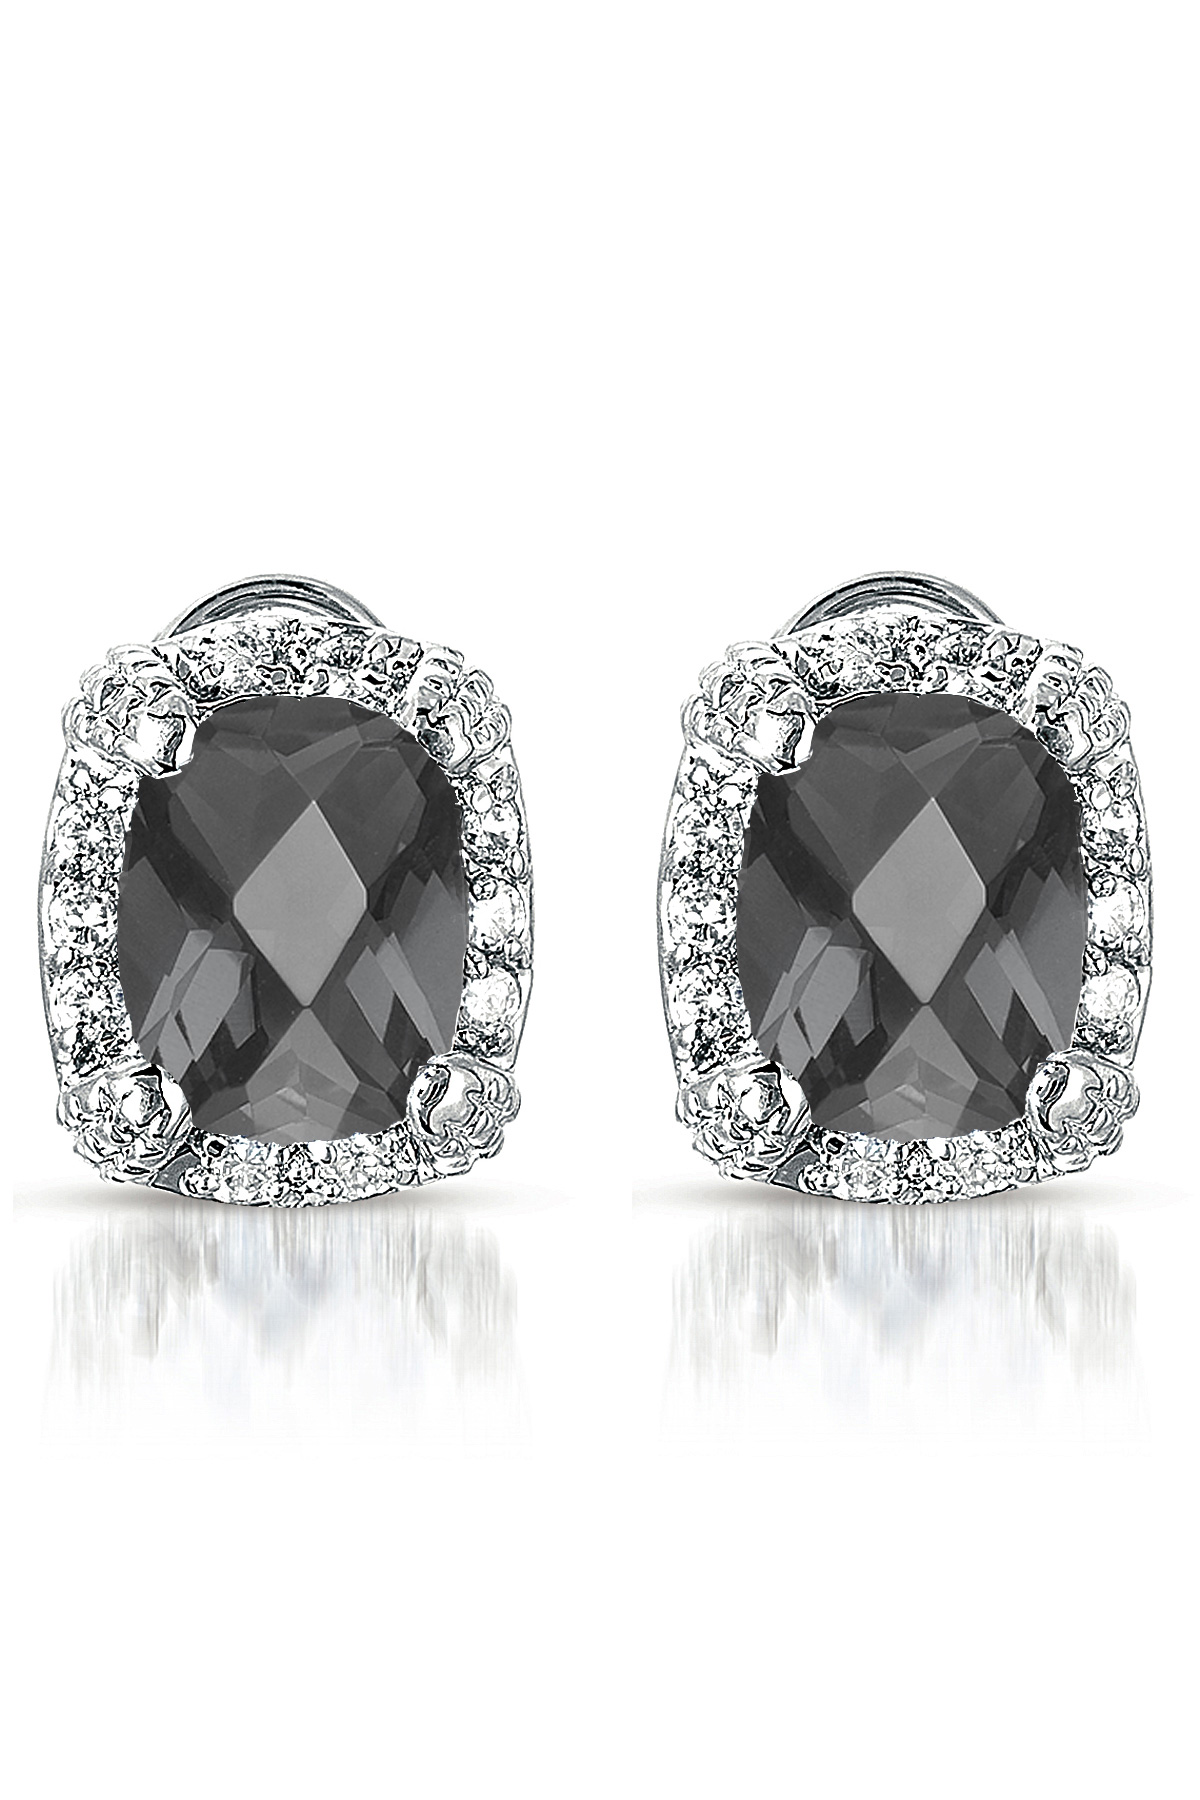 Cubic Zirconia (.925) Sterling Silver Black Square Earrings